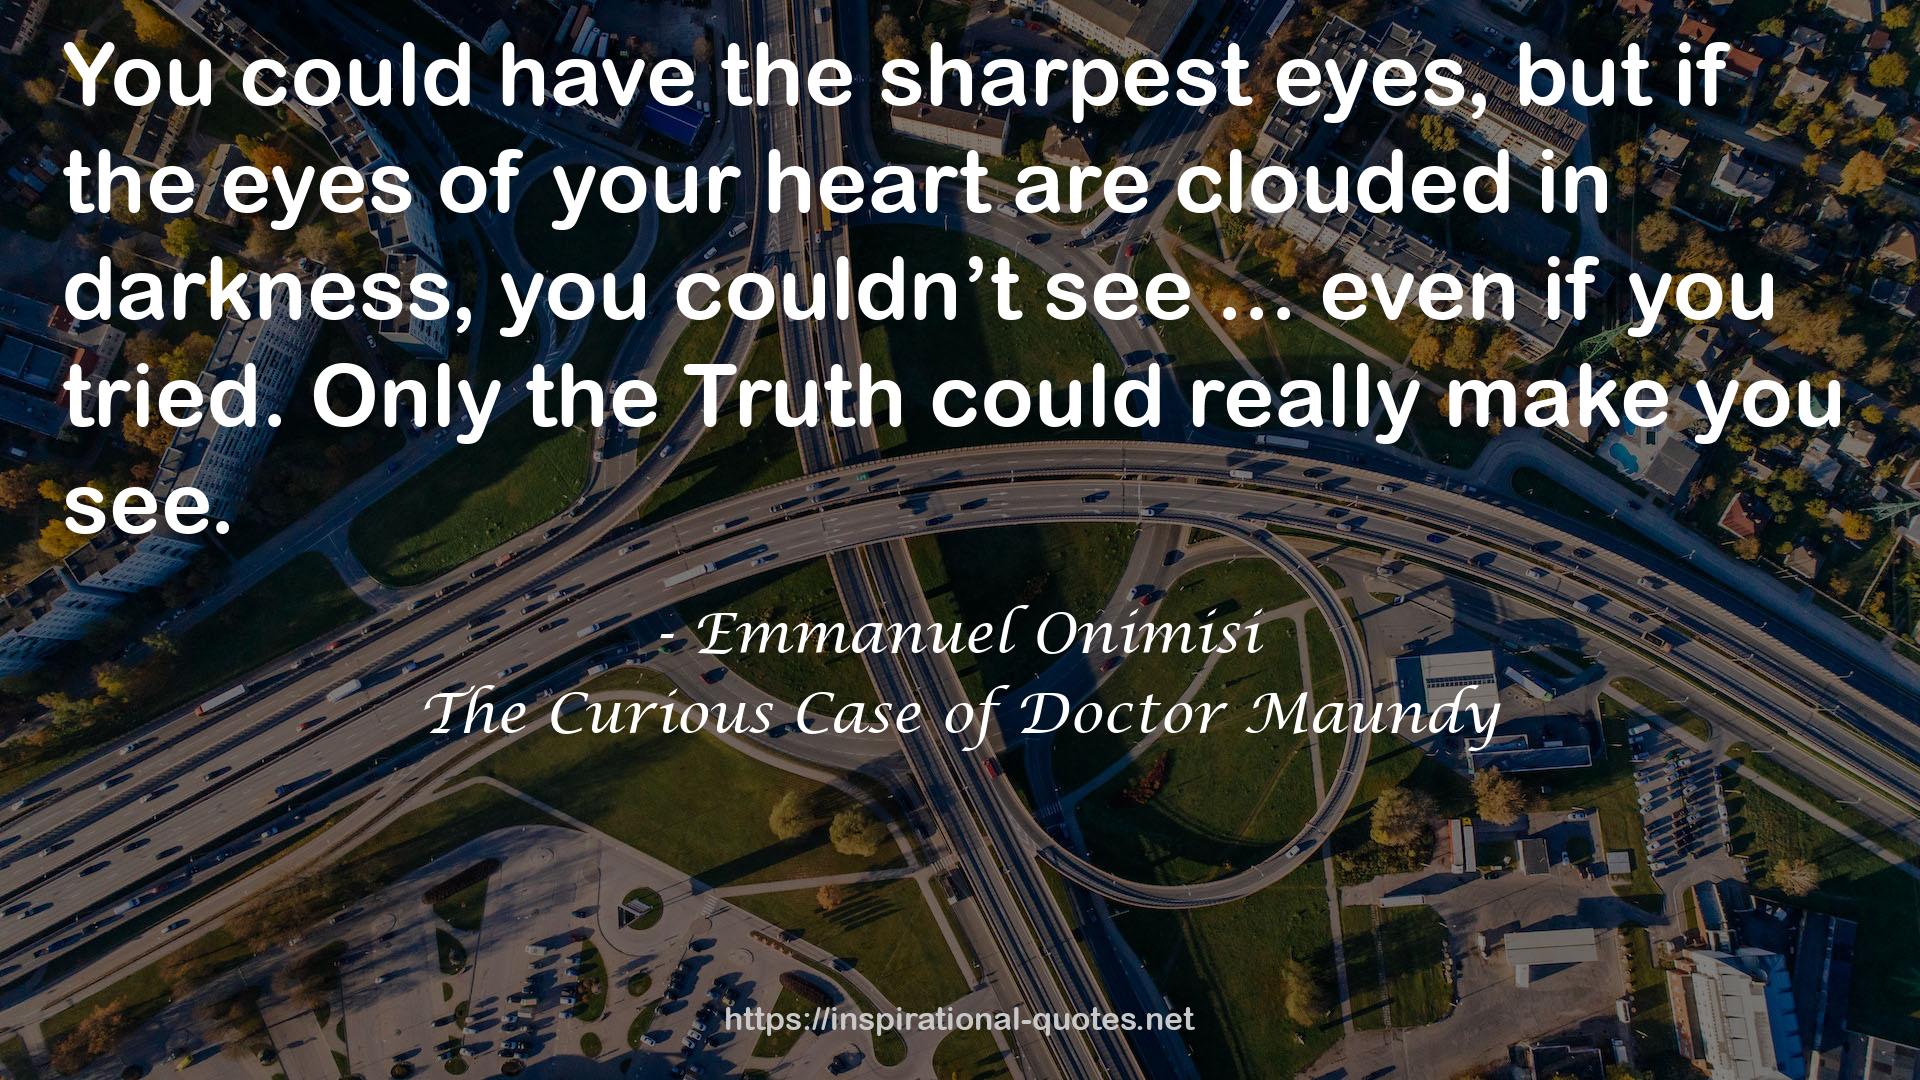 The Curious Case of Doctor Maundy QUOTES